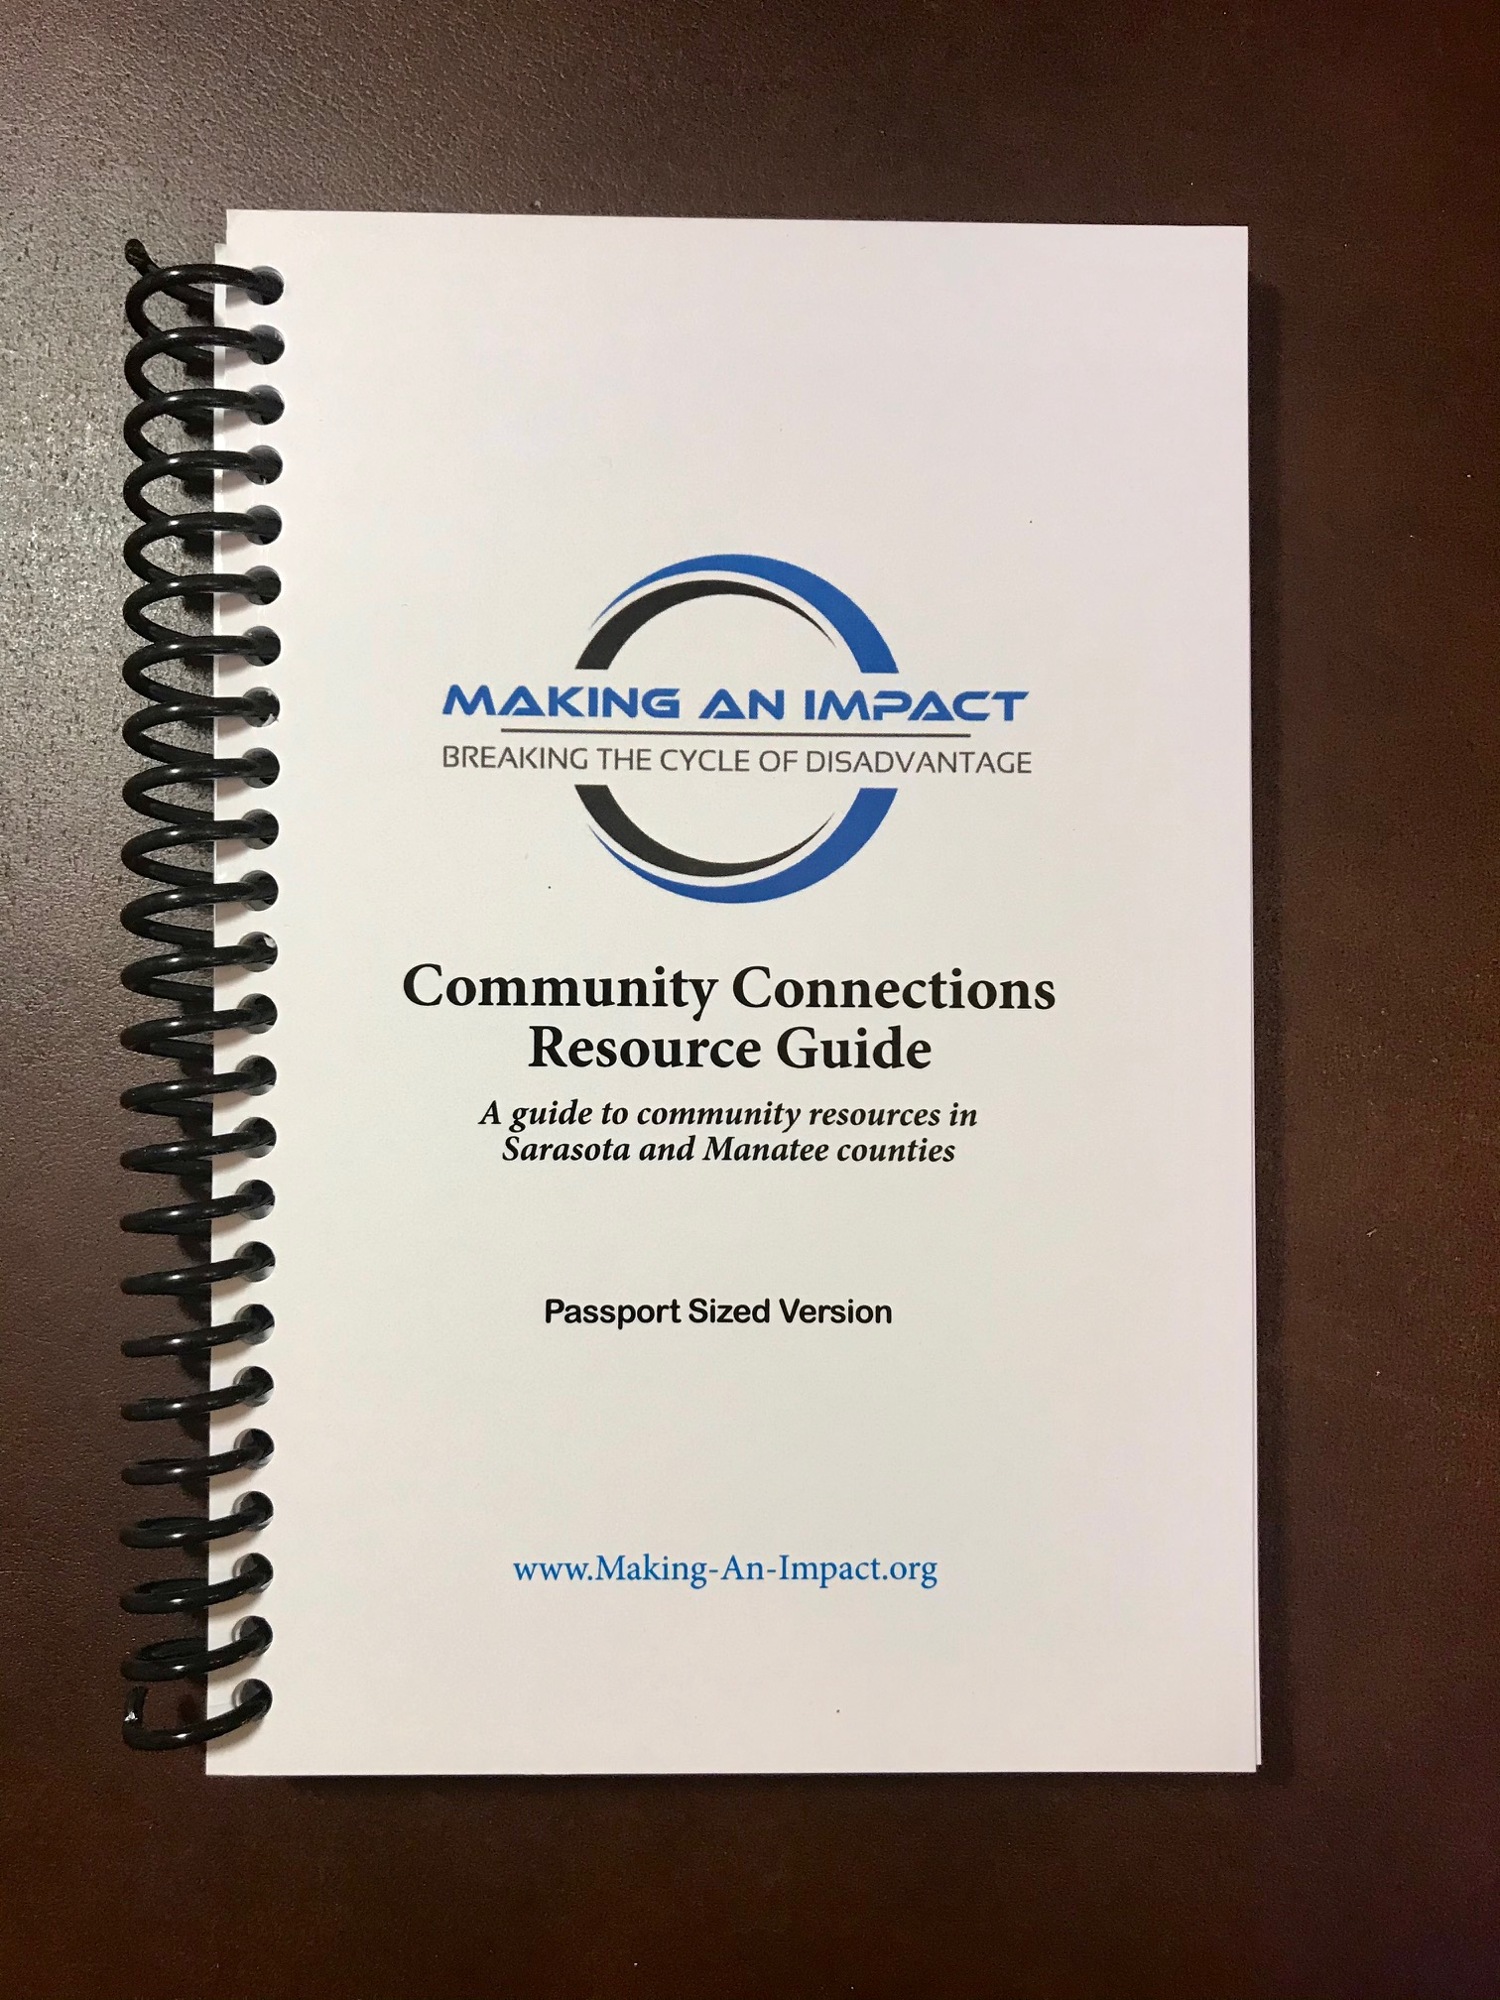 Making An Impact has distributed more than 1,000 guides to different organizations in Manatee and Sarasota counties. Photo courtesy of Making An Impact.